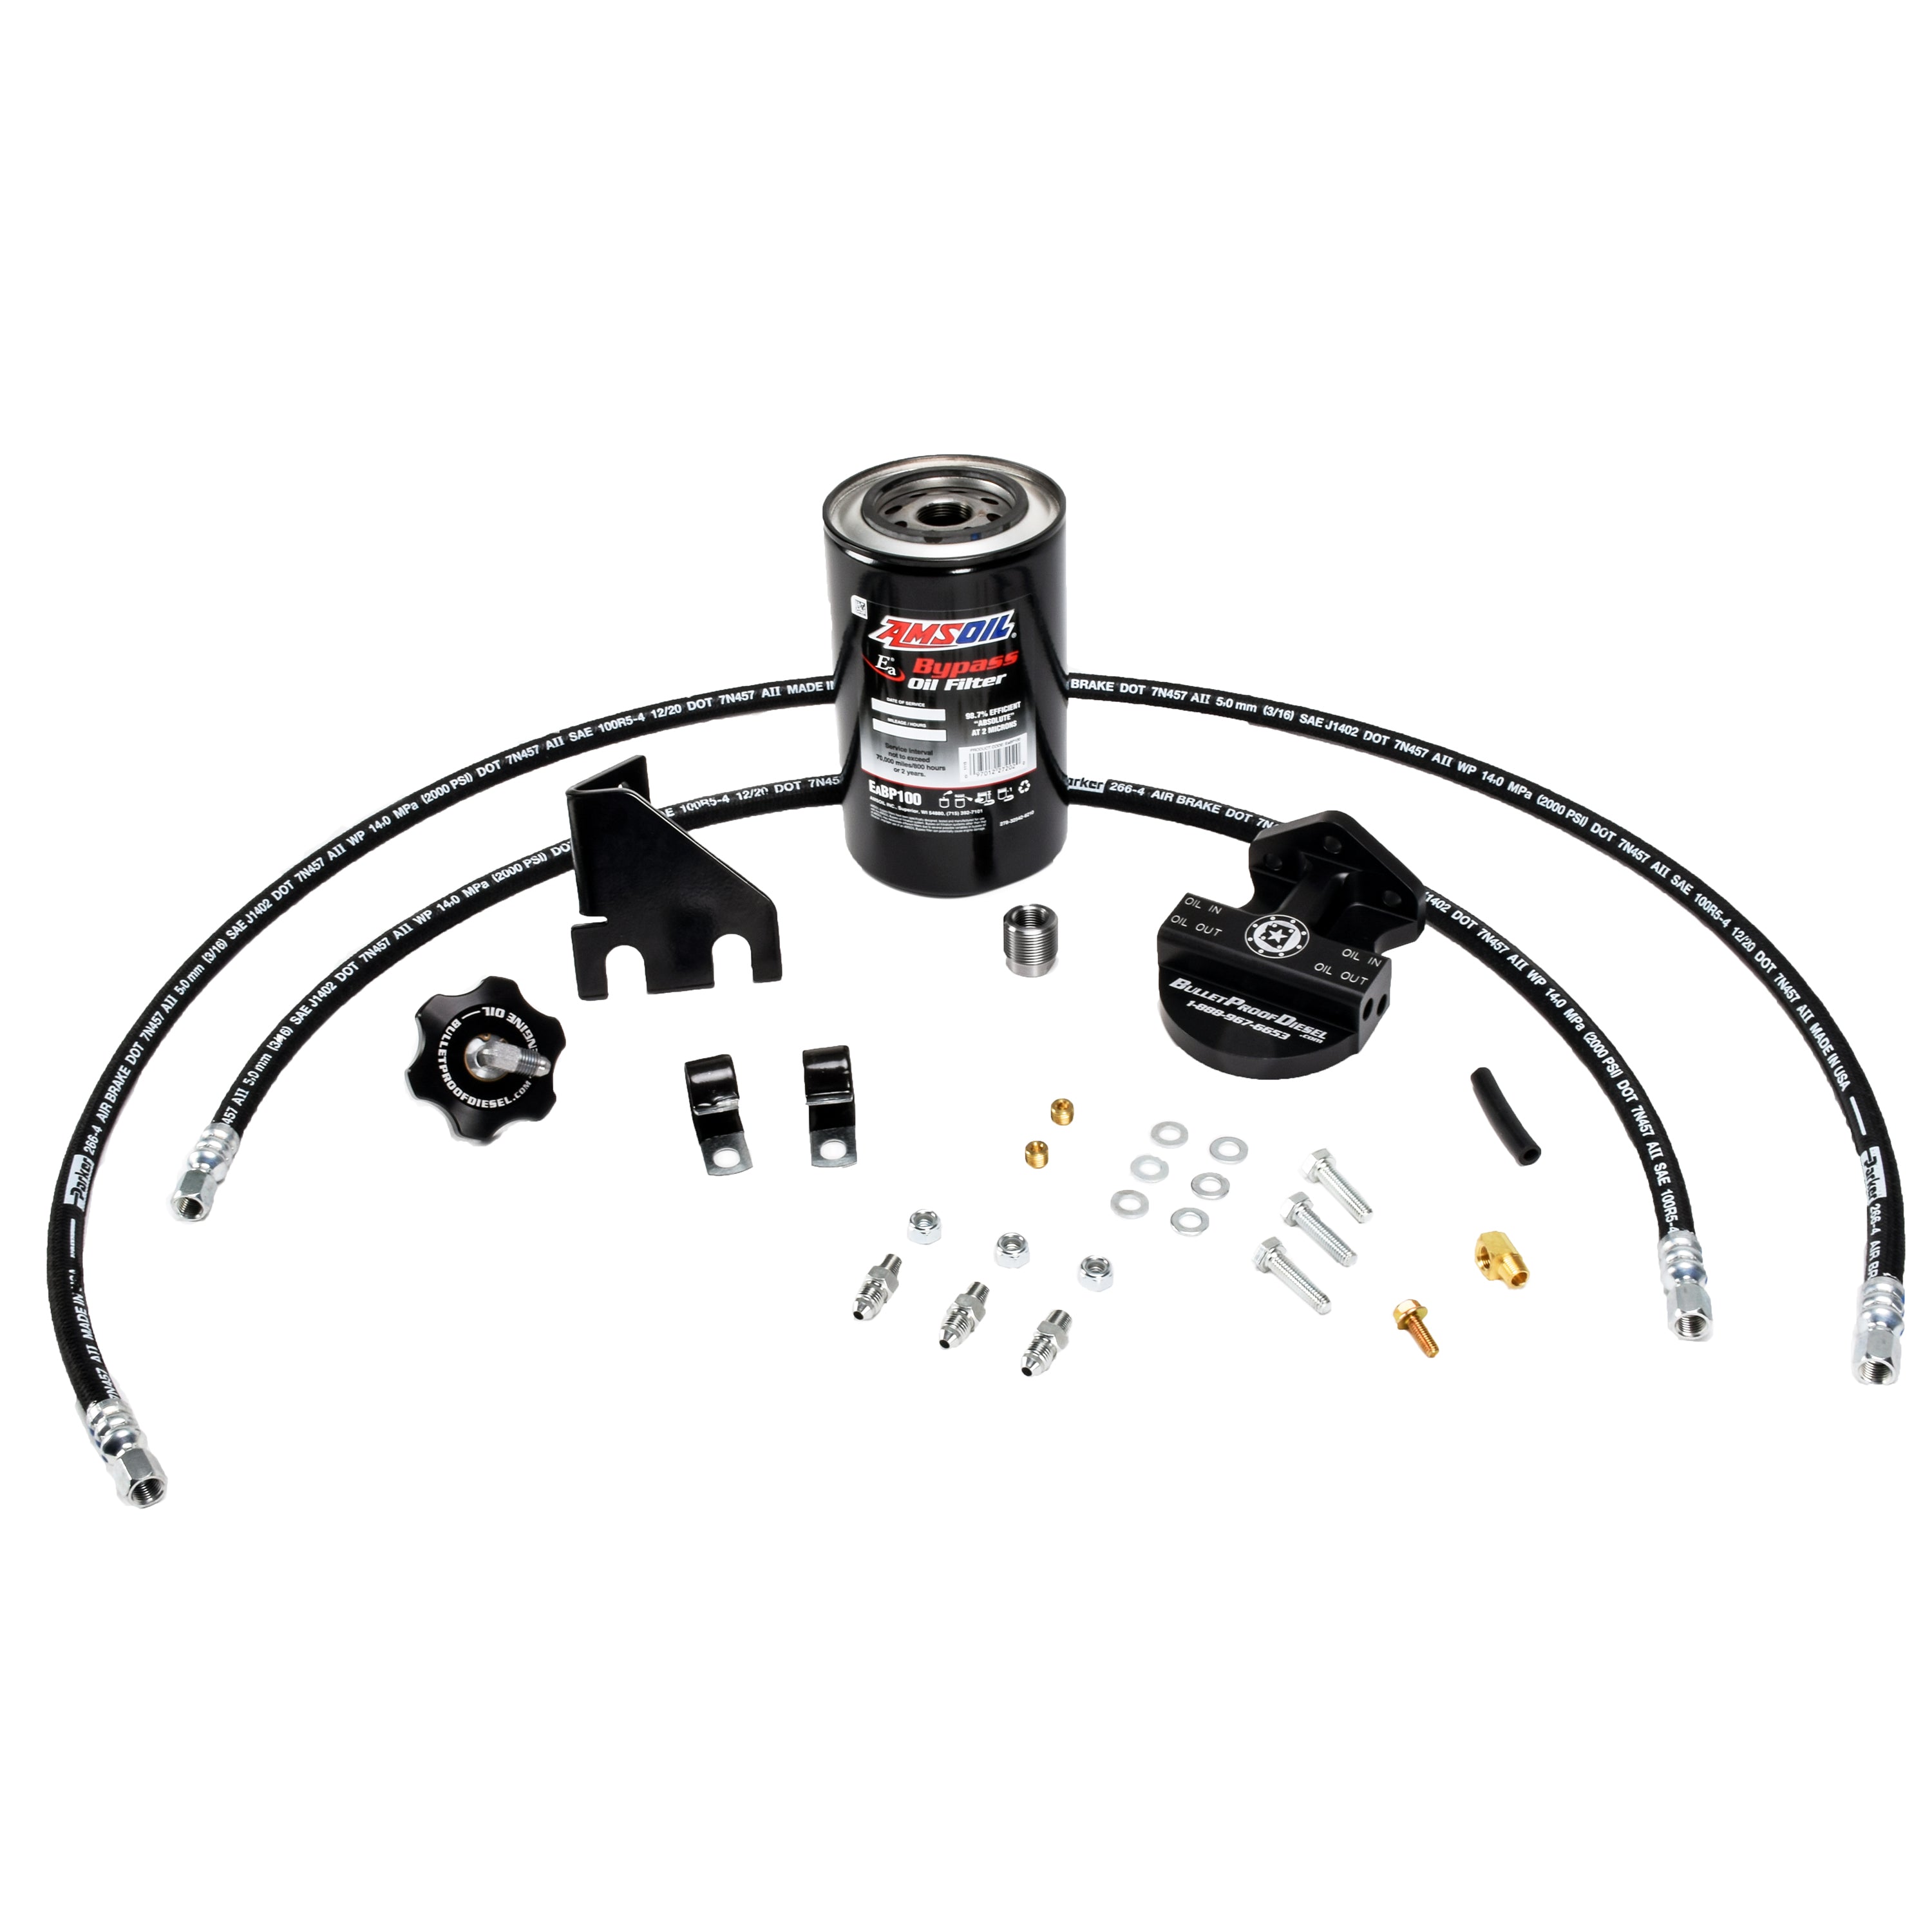 This BulletProof Upgraded Oil Bypass System Assembly Fits 2010 2011 2012 2013 2014 2015 2016 2017 2018 RAM Trucks with the 6.7L Diesel Engine. This system boasts a superior, fine oil filtration of 2 Microns with this Amsoil EaBP-100 Filter. Includes custom machined billet Engine Oil Cap and all other parts for a successful installation. 